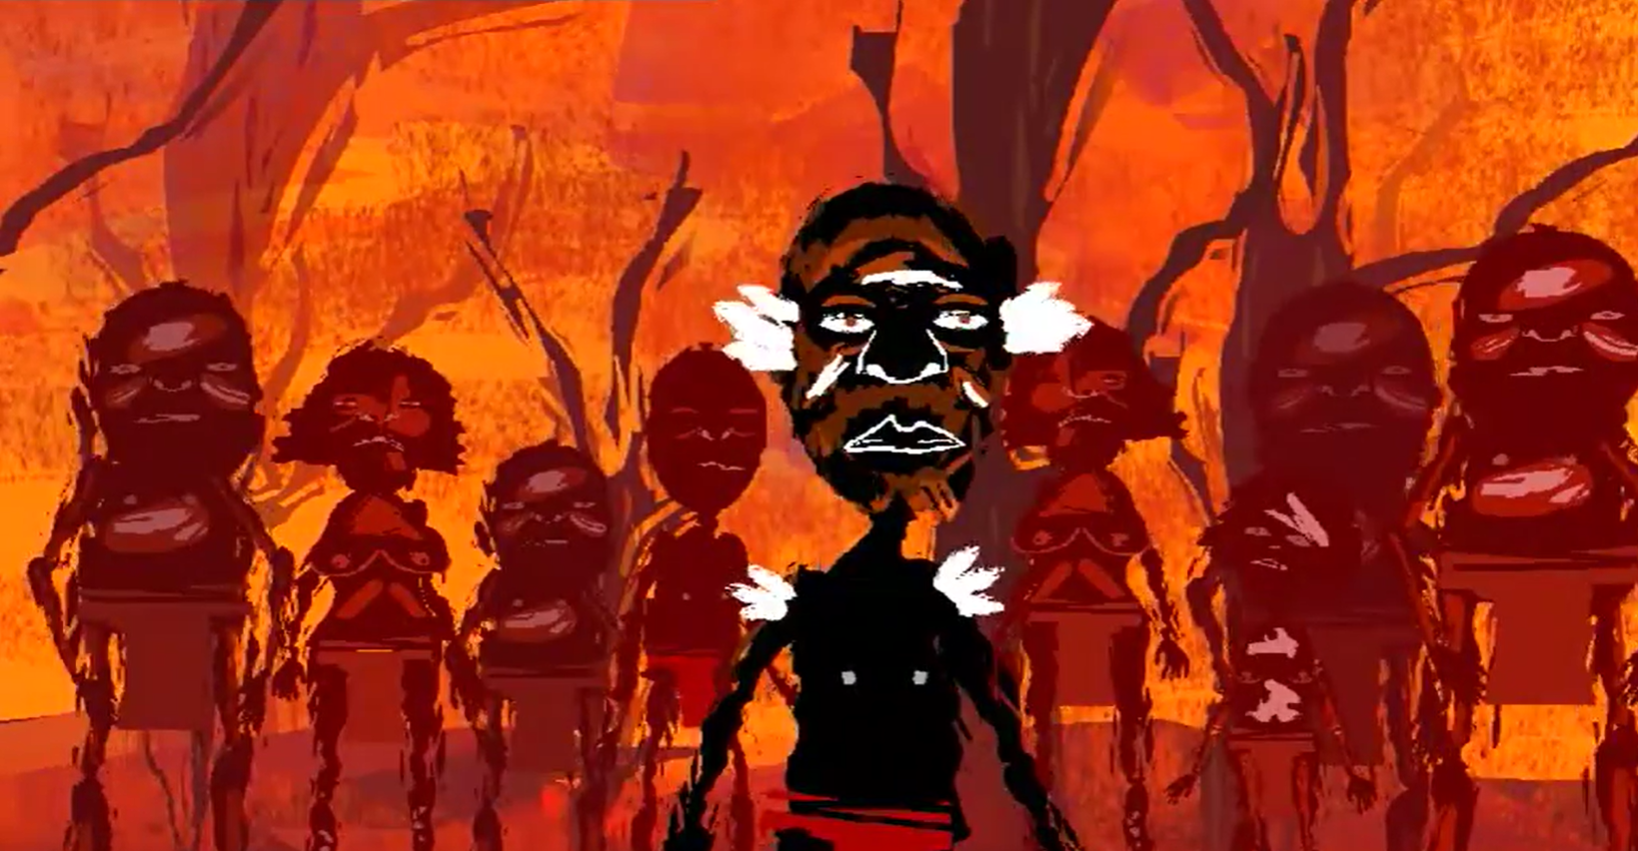 DUST ECHOES – Animations based on twelve Dreamtime Stories from Central Arnhem Land